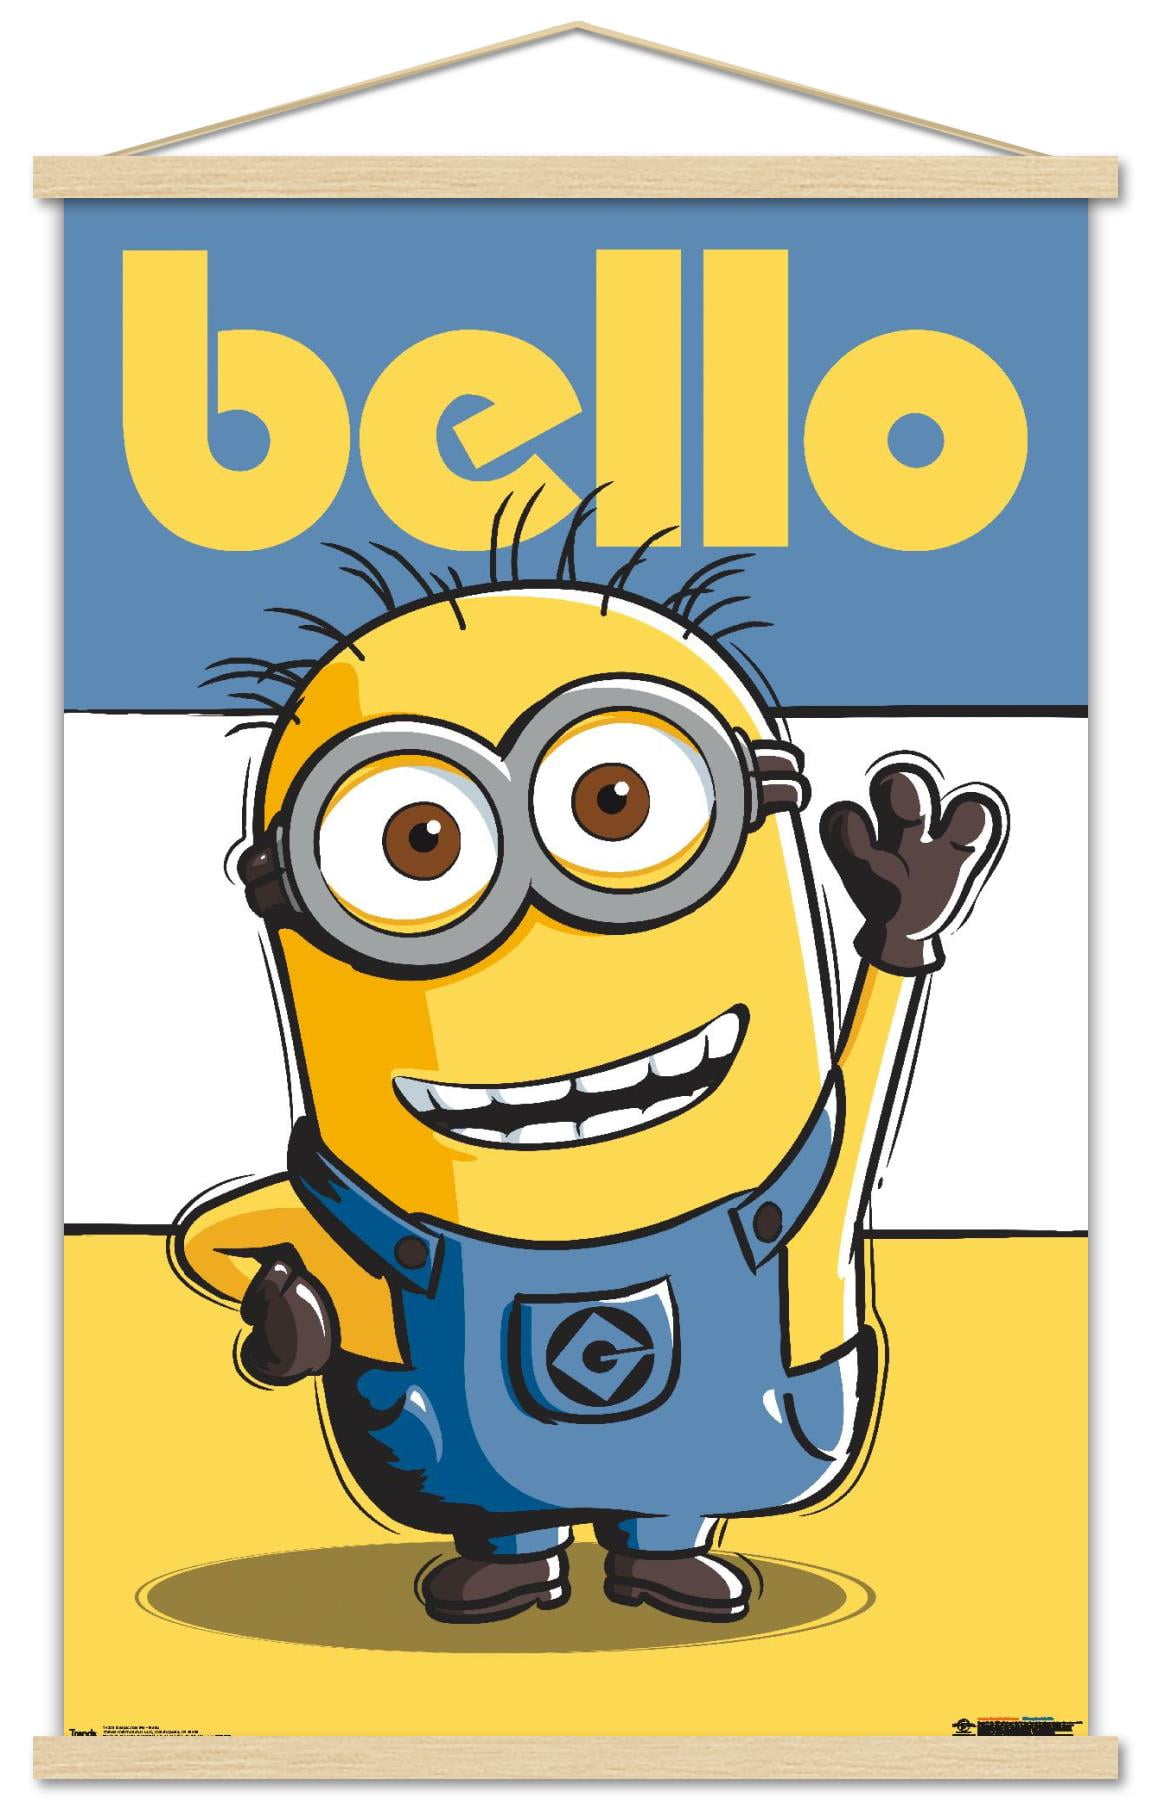 Details about   Despicable Me 3 80's Bello Poster Magnetic Notice Board Inc Magnets 